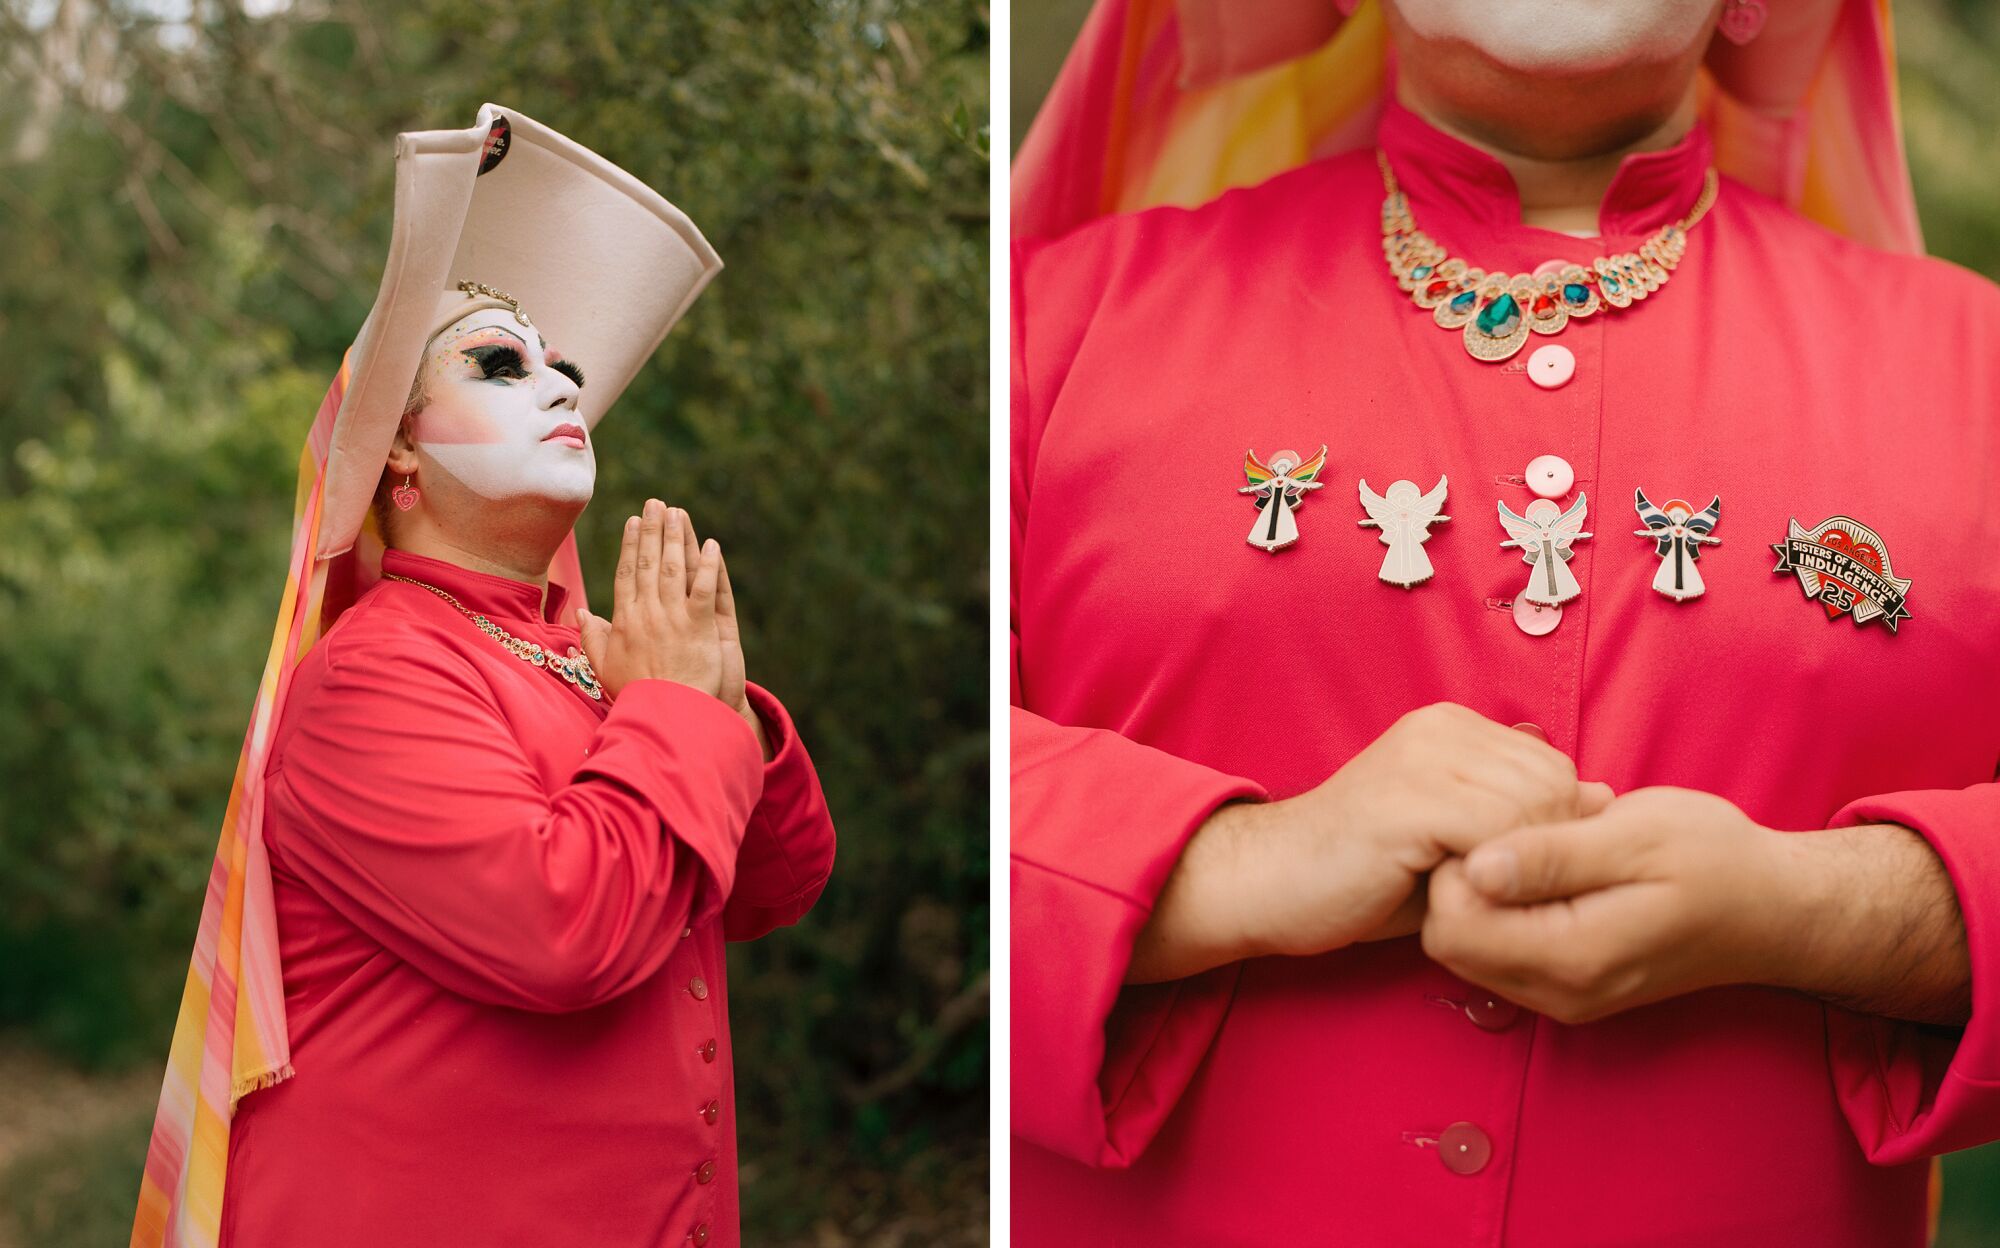 Side-by-side photos of a nun pulling her red shirt, clasping her hands in prayer, and close-ups of the brooches on her chest.